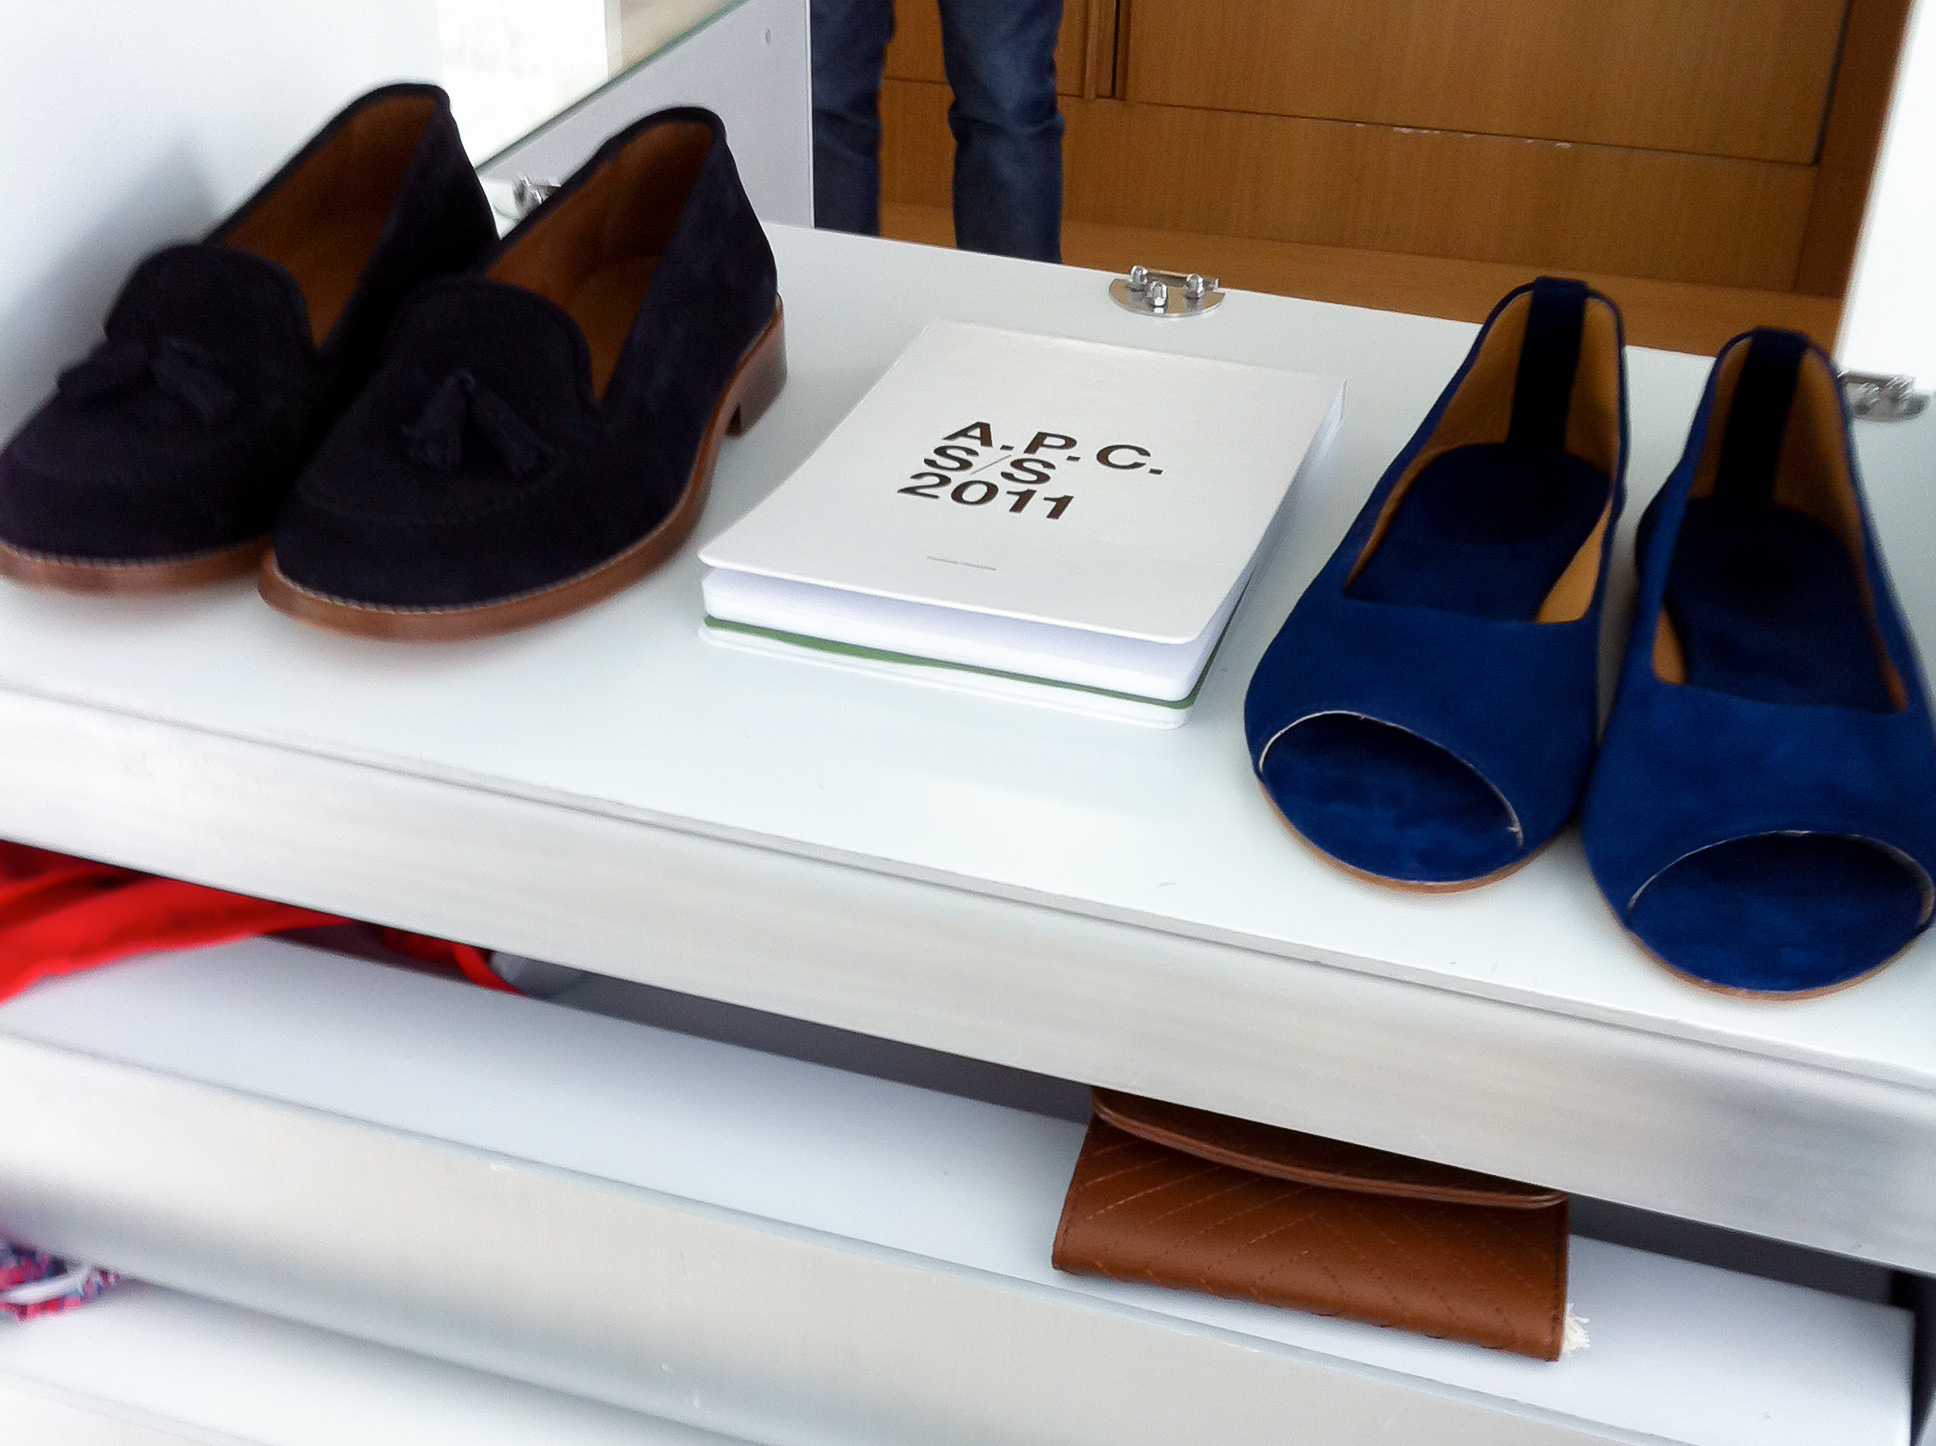 Accessory display at A.P.C. store in Paris. Photo by alphacityguides.